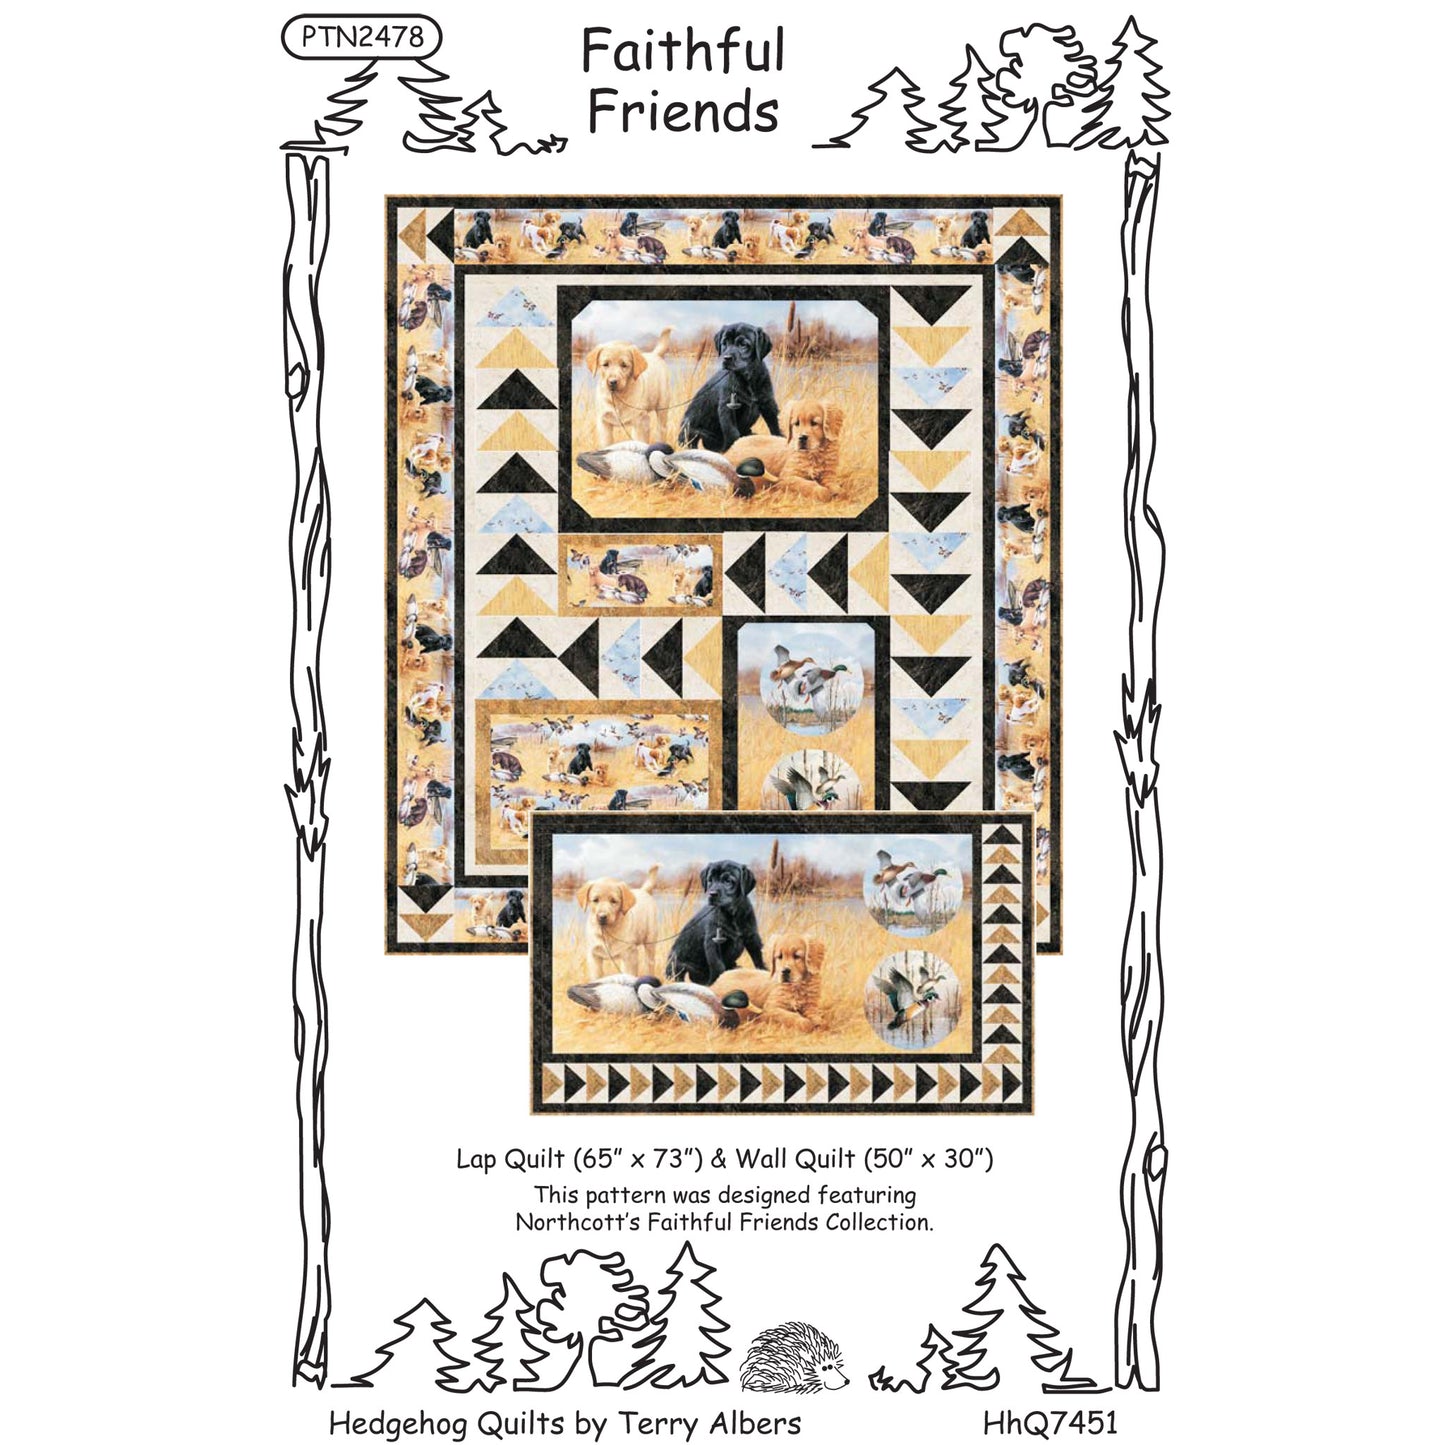 Cover image of pattern for Faithful Friends Quilt.